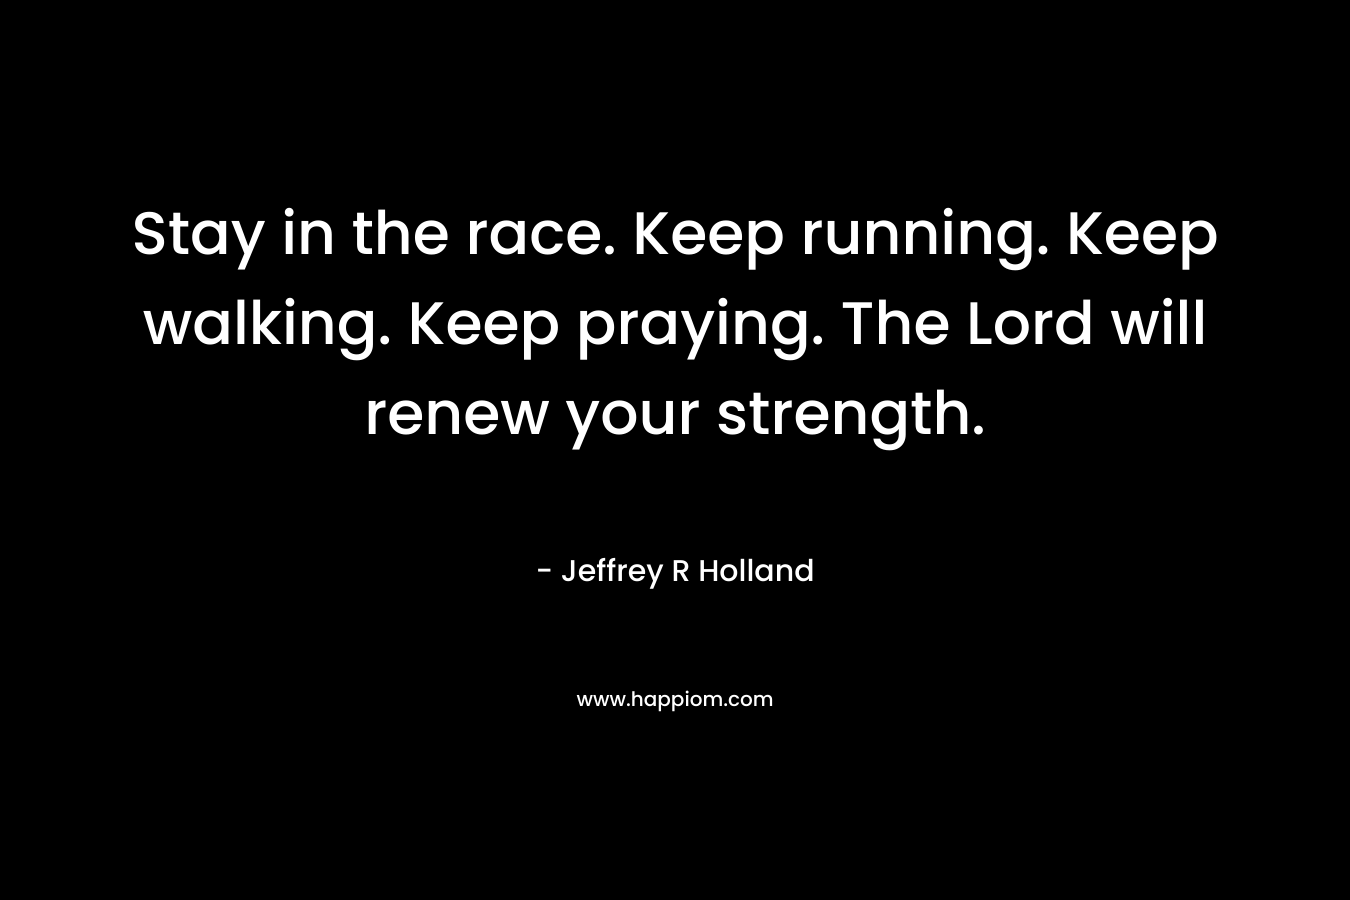 Stay in the race. Keep running. Keep walking. Keep praying. The Lord will renew your strength. – Jeffrey R Holland